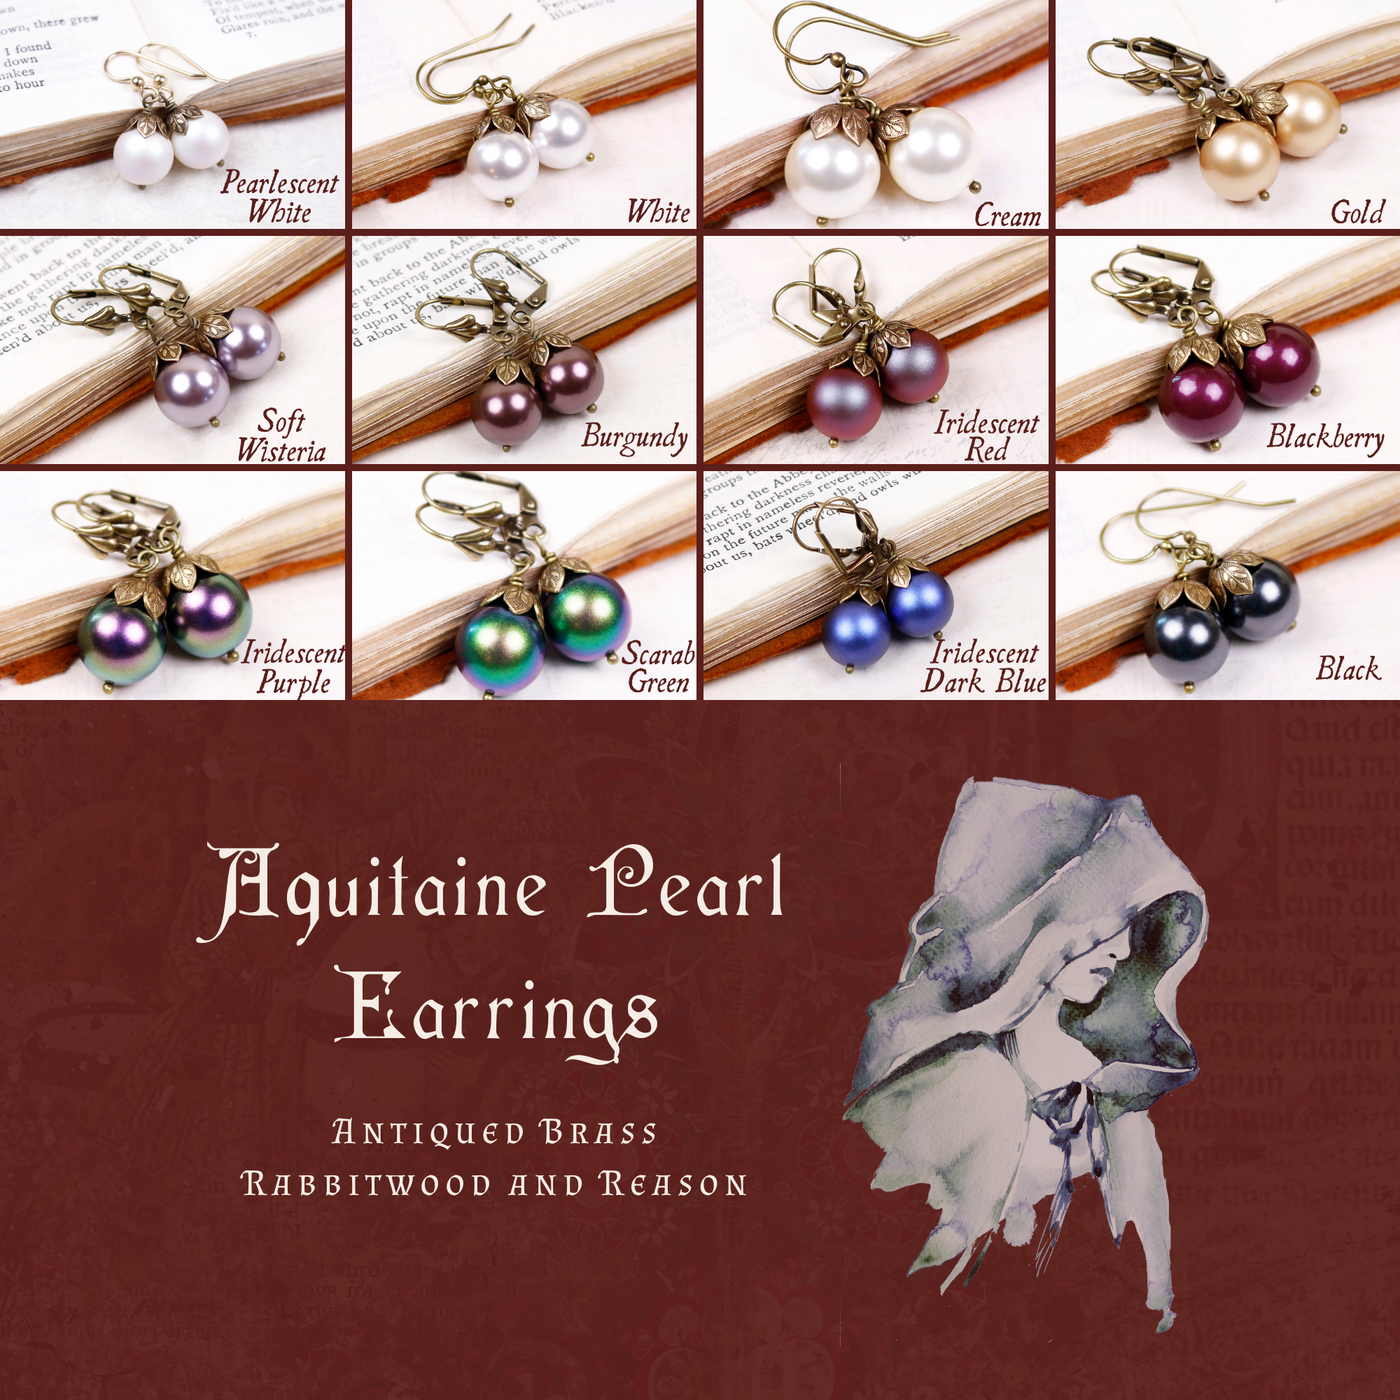 Group Pic: Aquitaine Pearl Earrings in Antiqued Brass by Rabbitwood and Reason